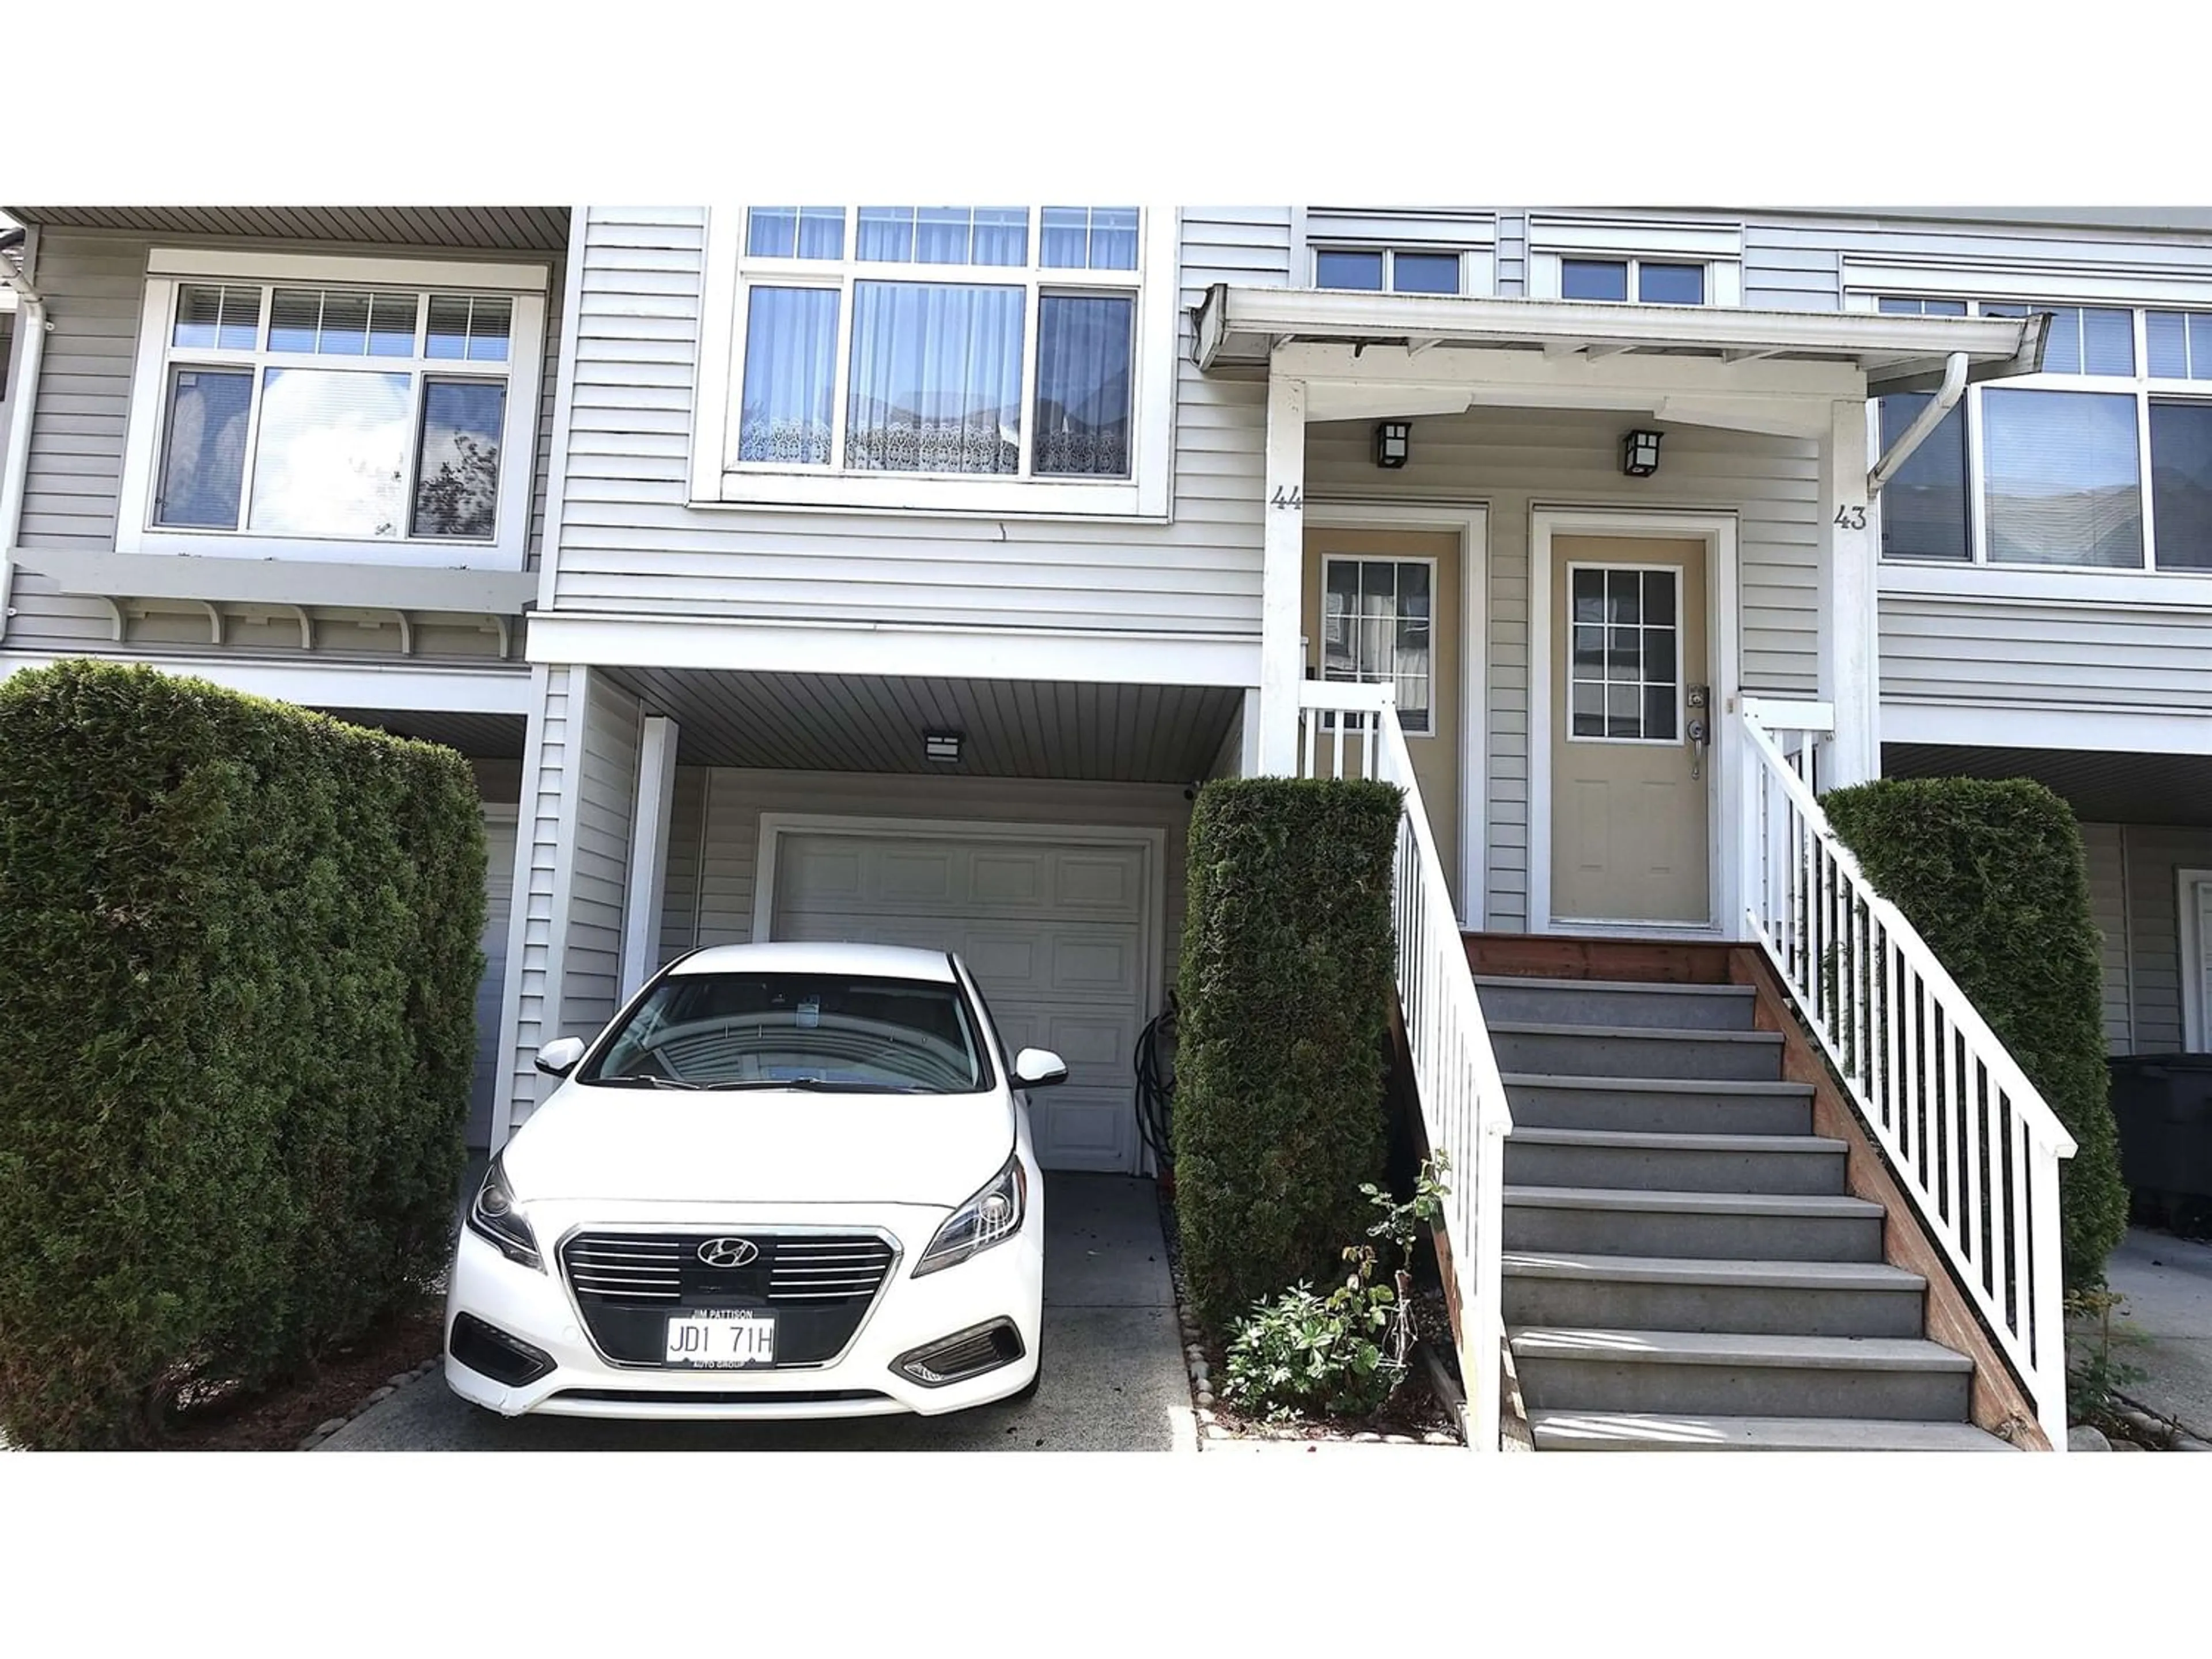 A pic from exterior of the house or condo for 44 16233 83 AVENUE, Surrey British Columbia V4N0Z3